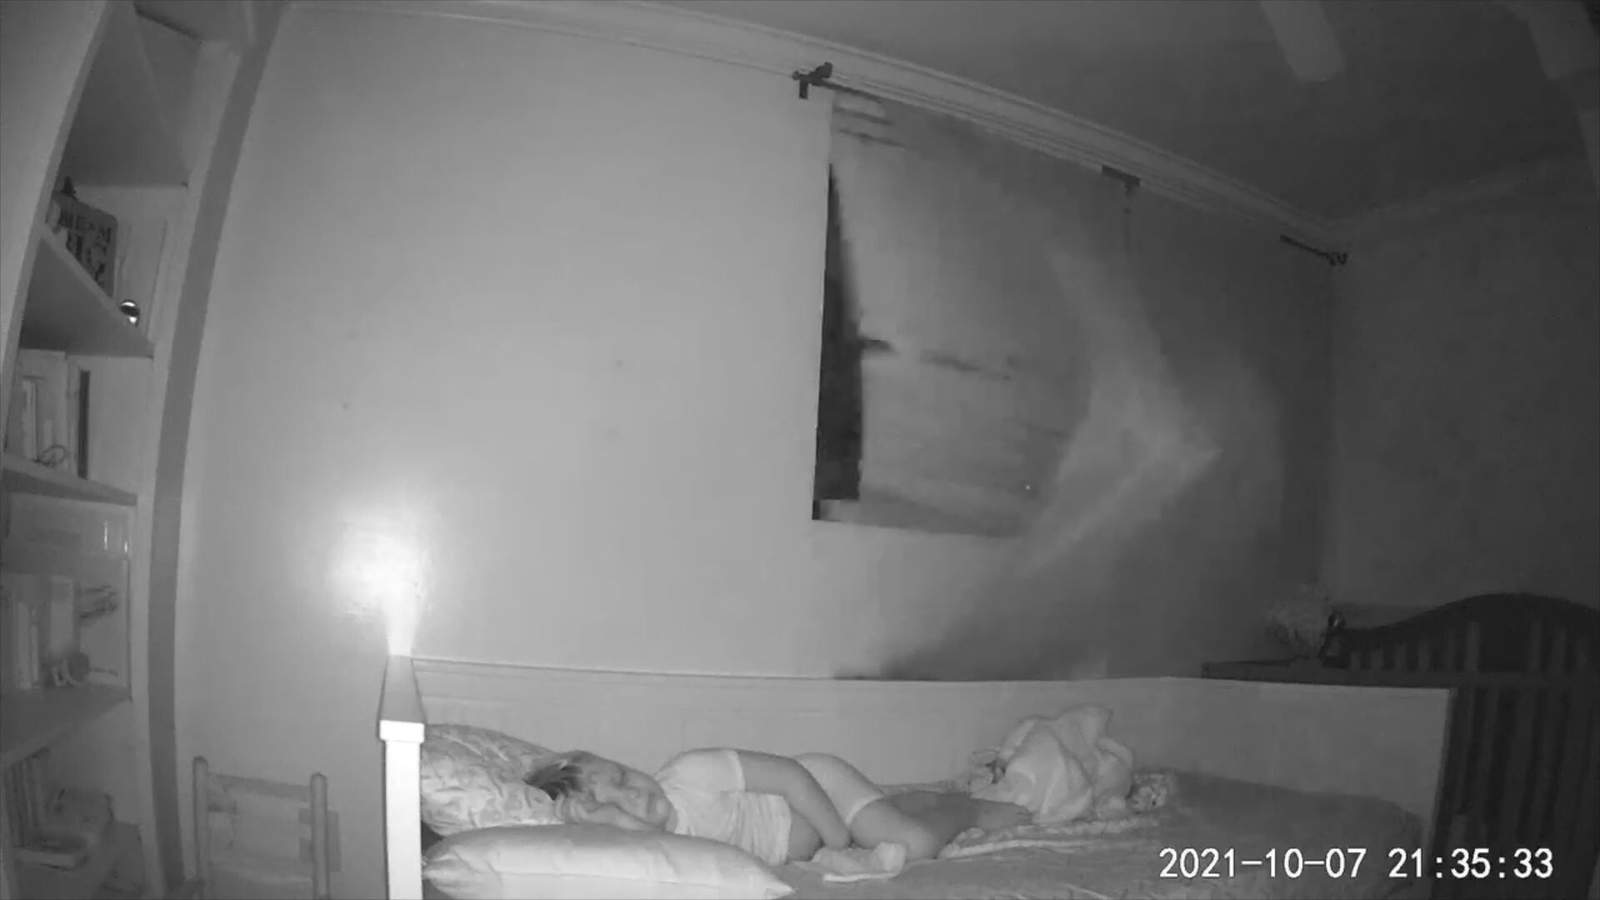 Baby monitor captures the moment a brick comes through the window of a child's bedroom in Miami Beach.